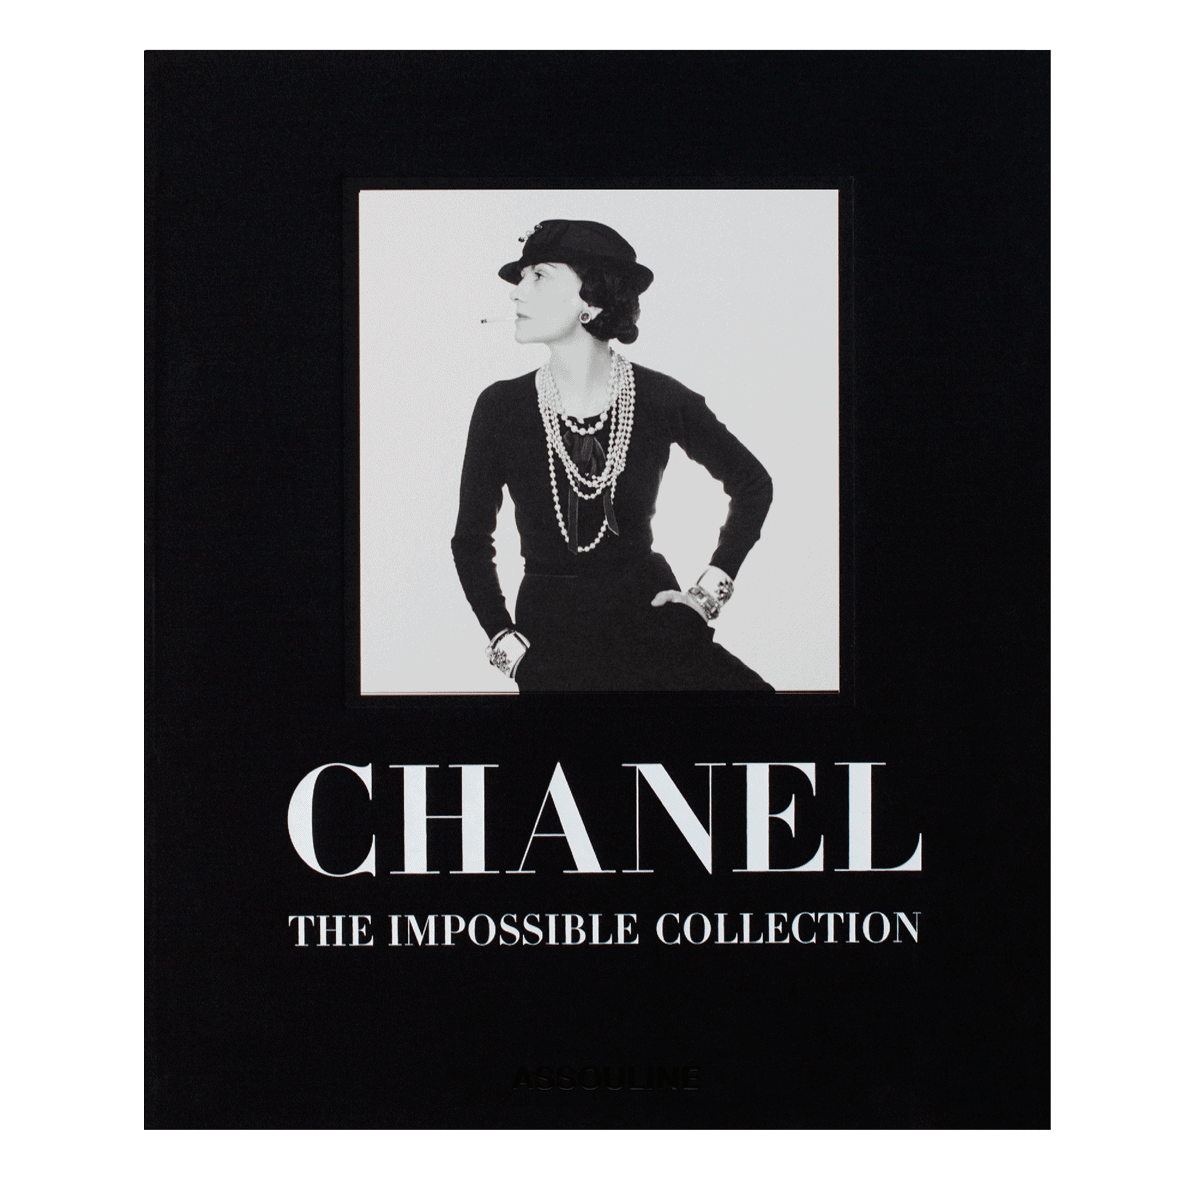 CHANEL: The Impossible Collection - Peyrelongue Chronos